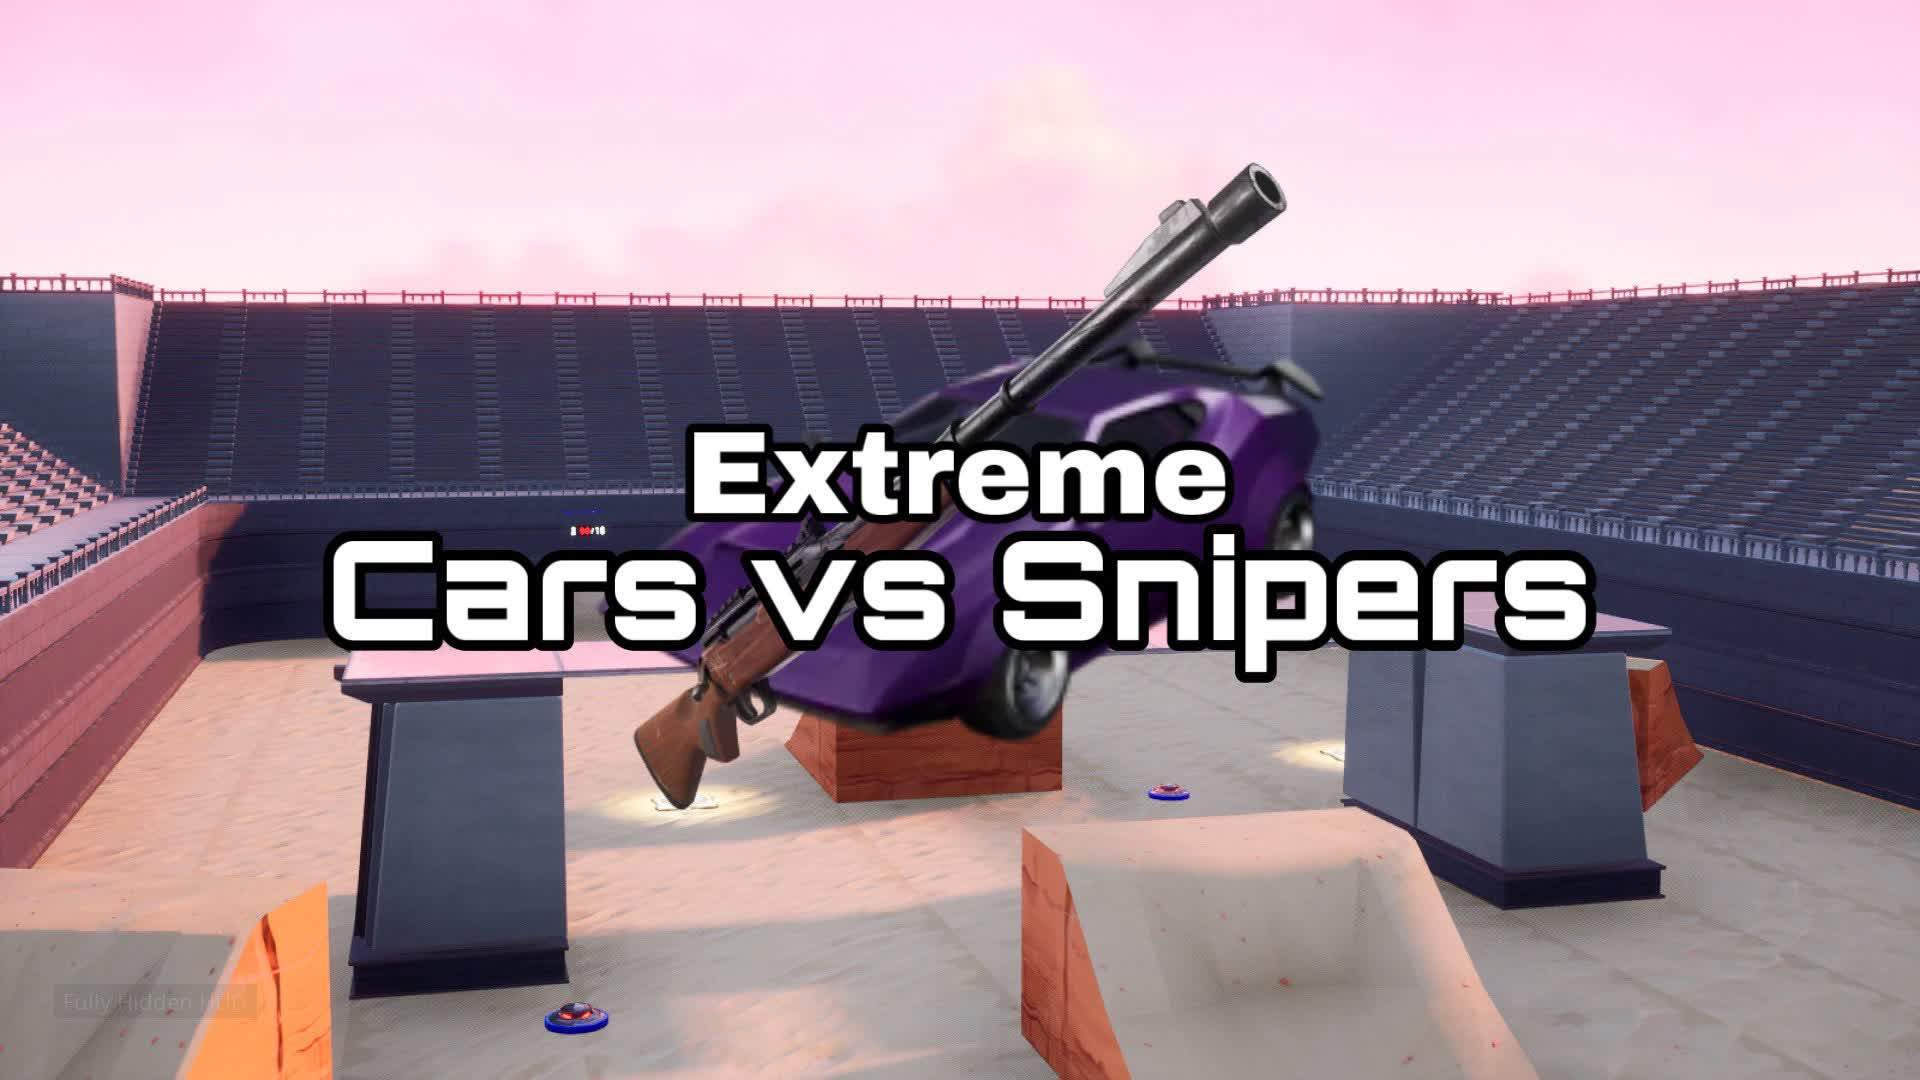 EXTREME CARS VS SNIPERS